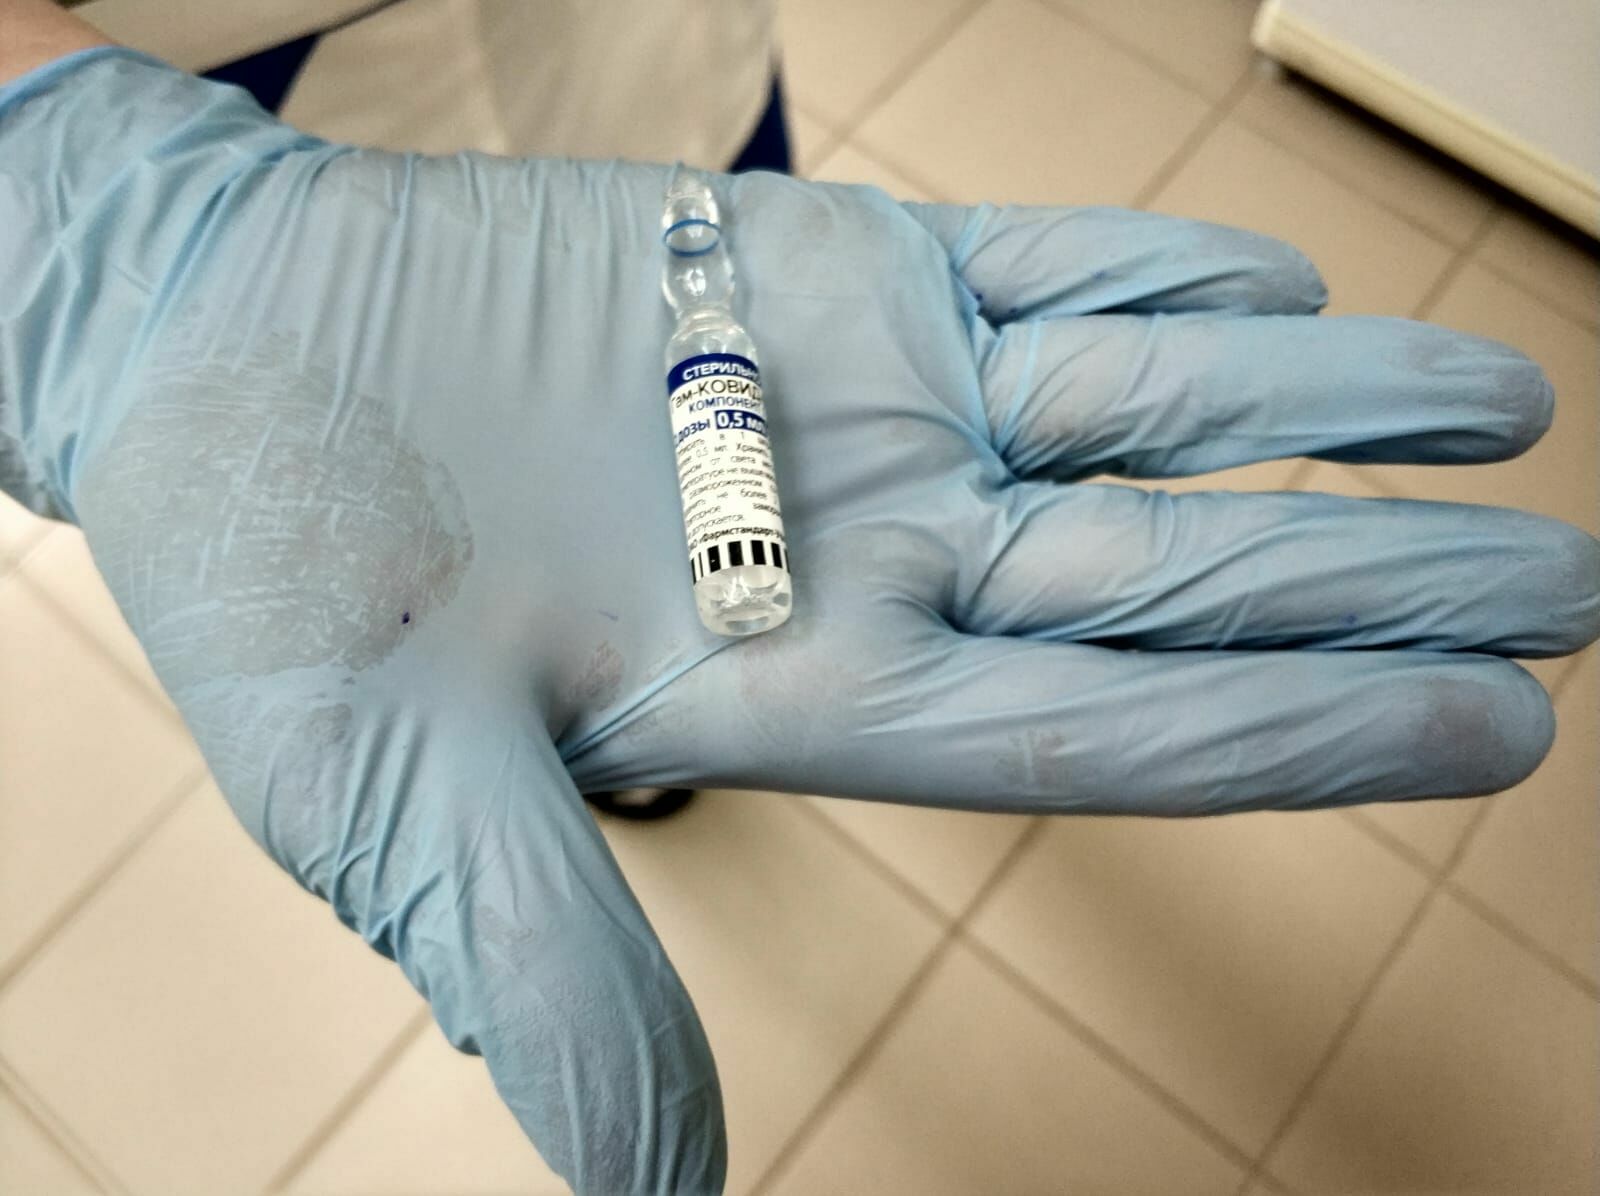 The Ministry of Health has completed all trials of the Sputnik-V vaccine